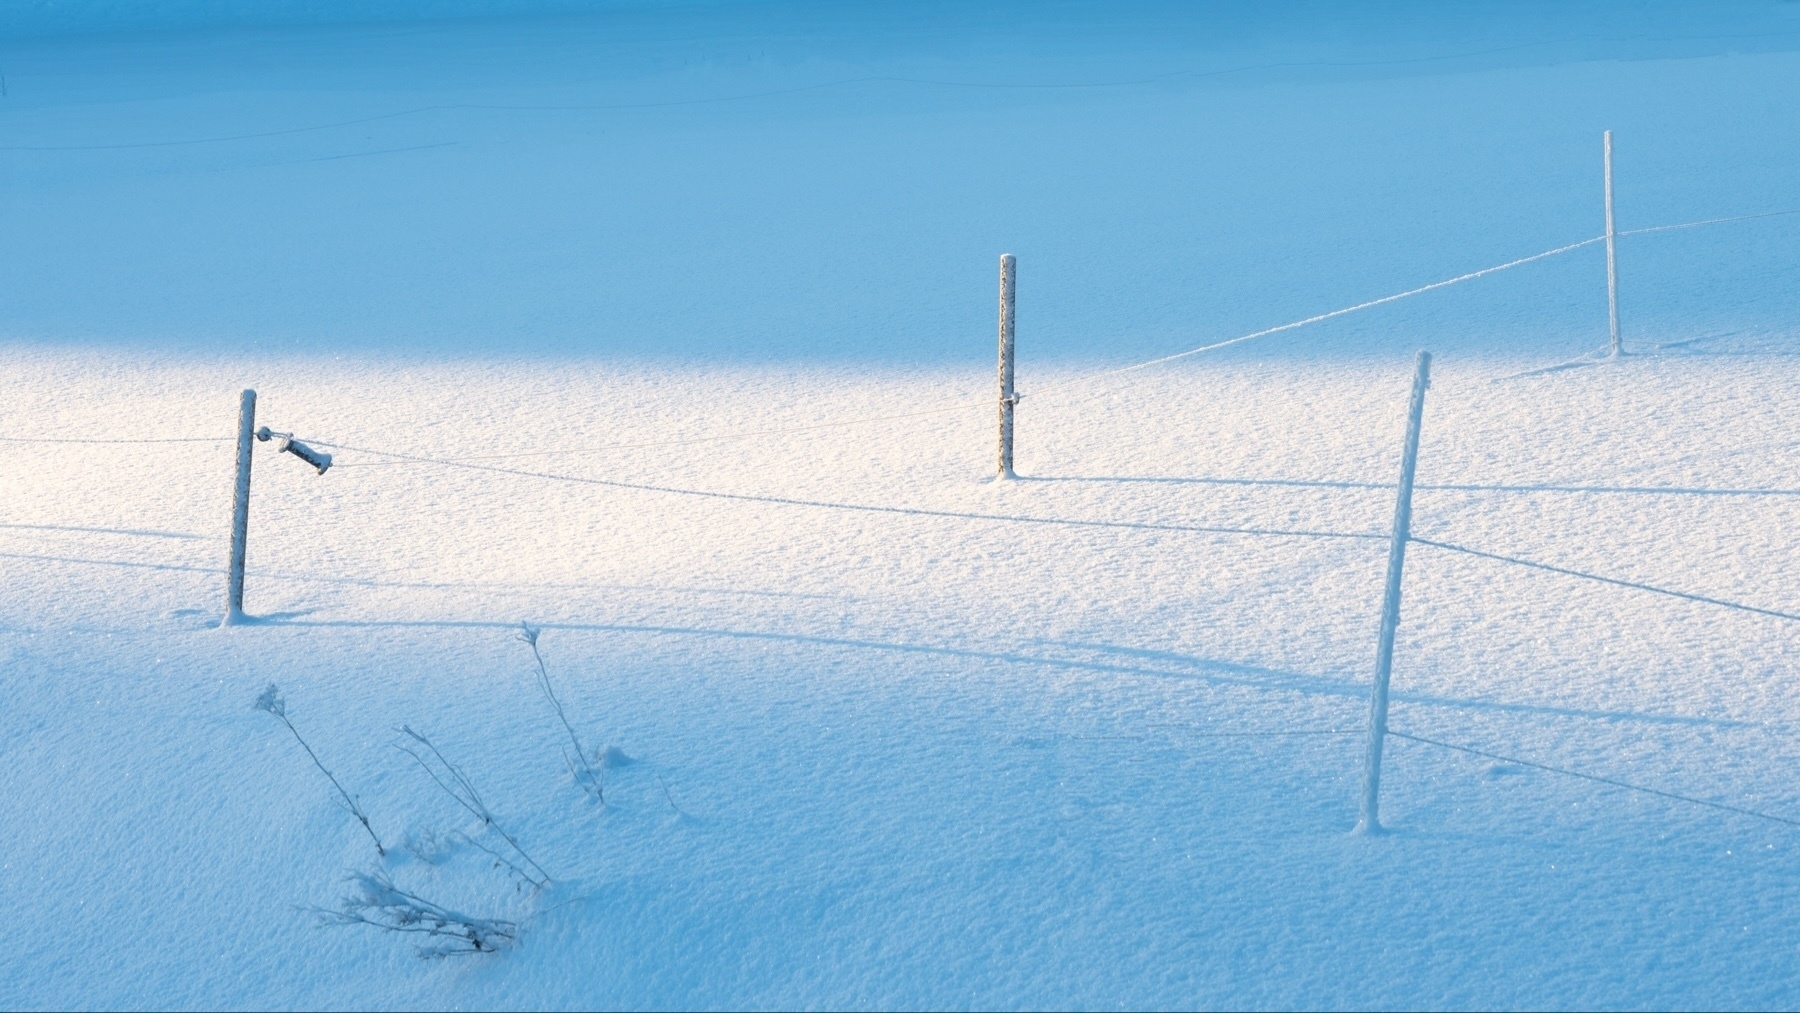 A tranquil snowy landscape with fence posts casting shadows on the undisturbed snow, illuminated by soft sunlight.